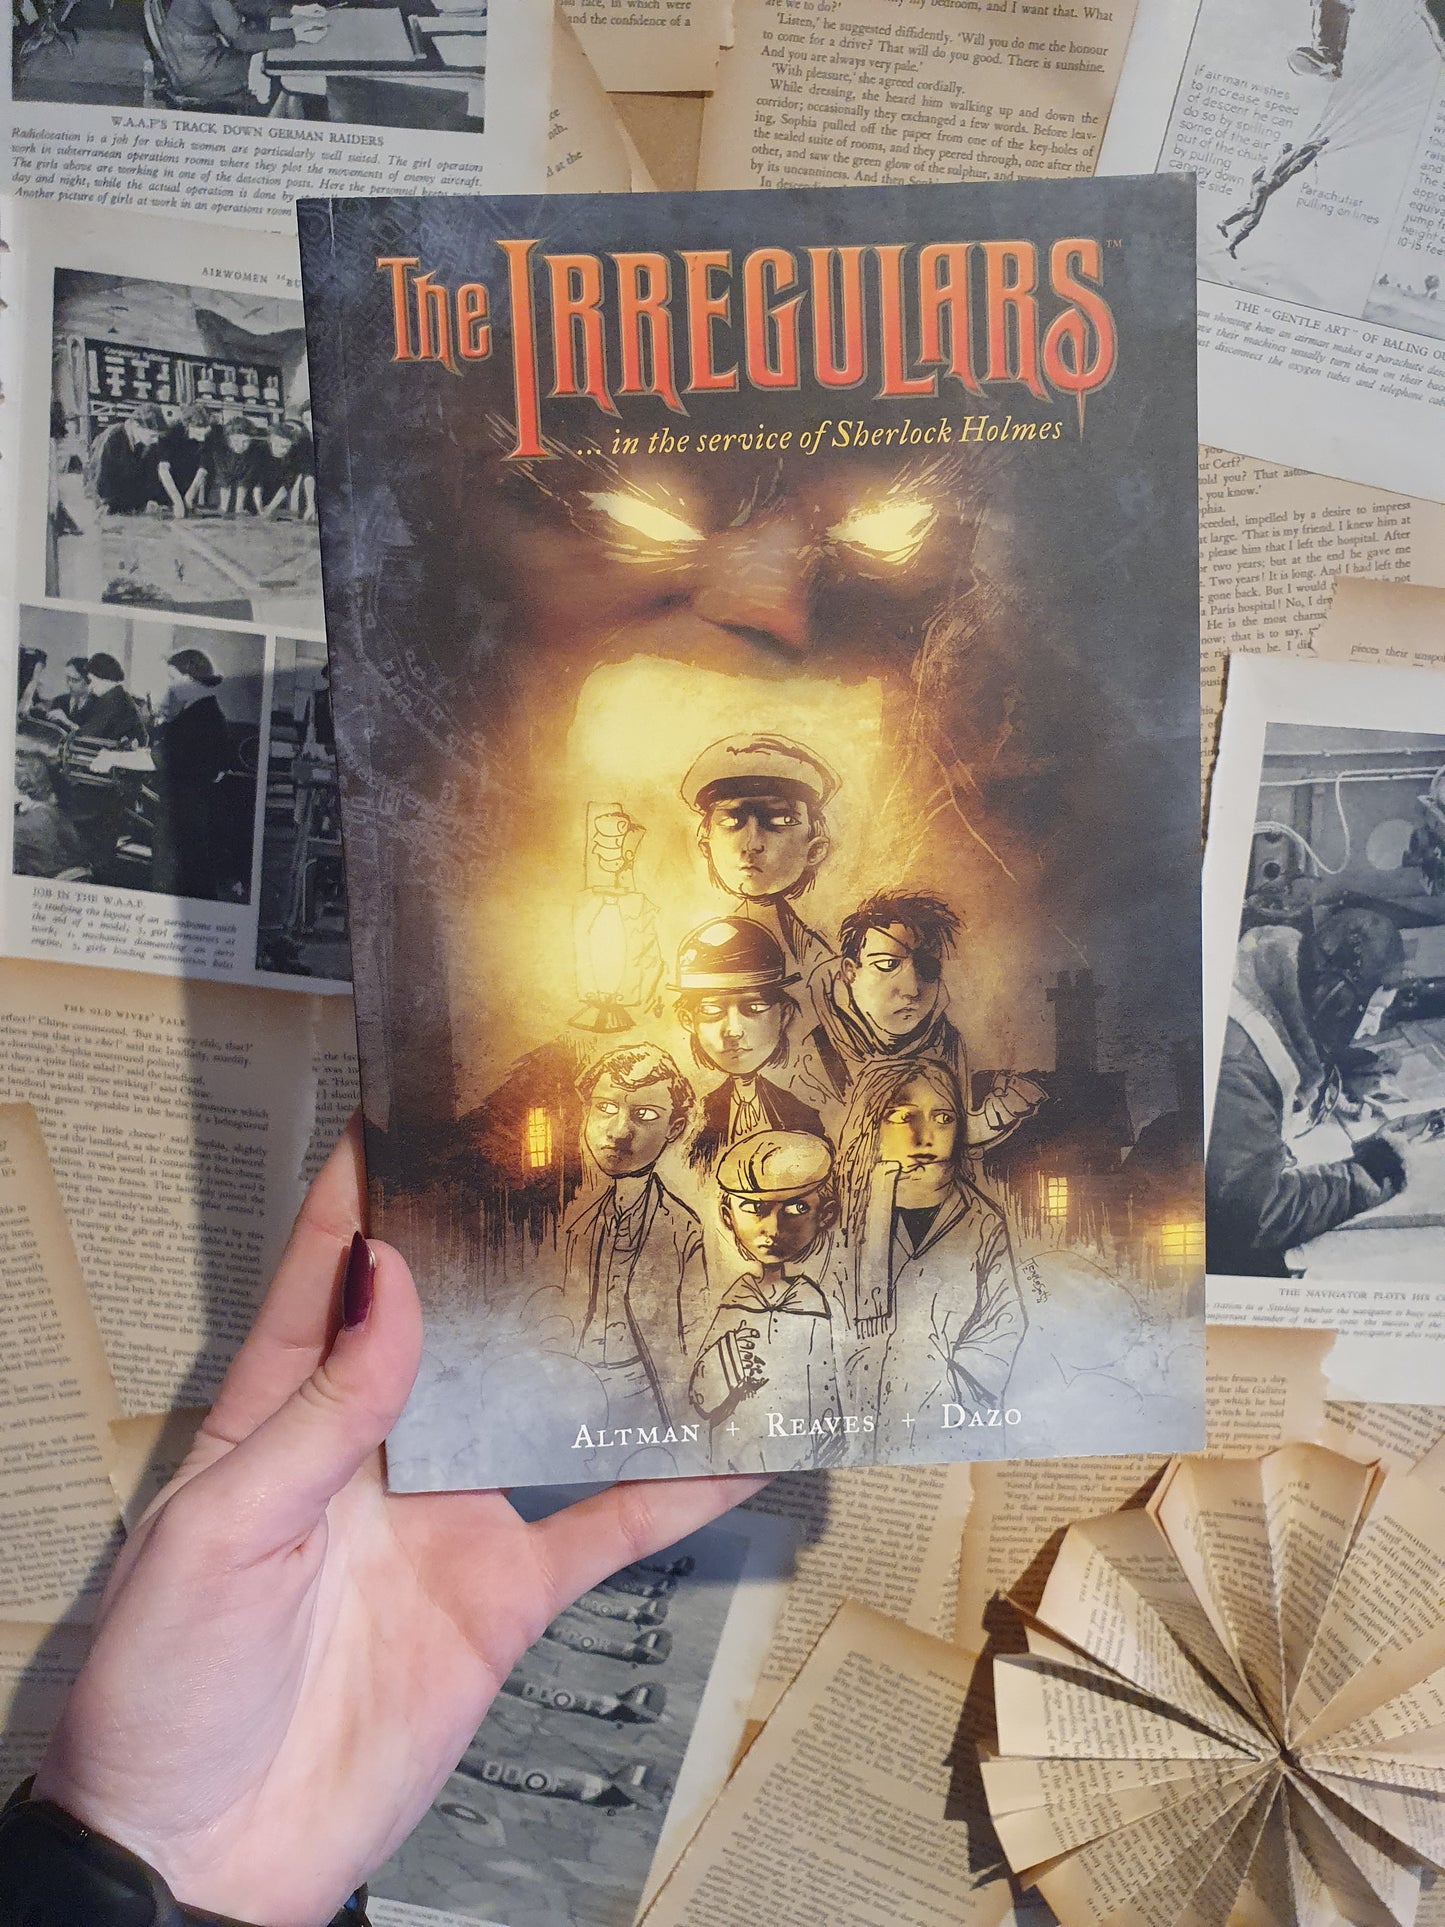 The Irregulars... In the Service of Sherlock Holmes by Altman..... (2005)